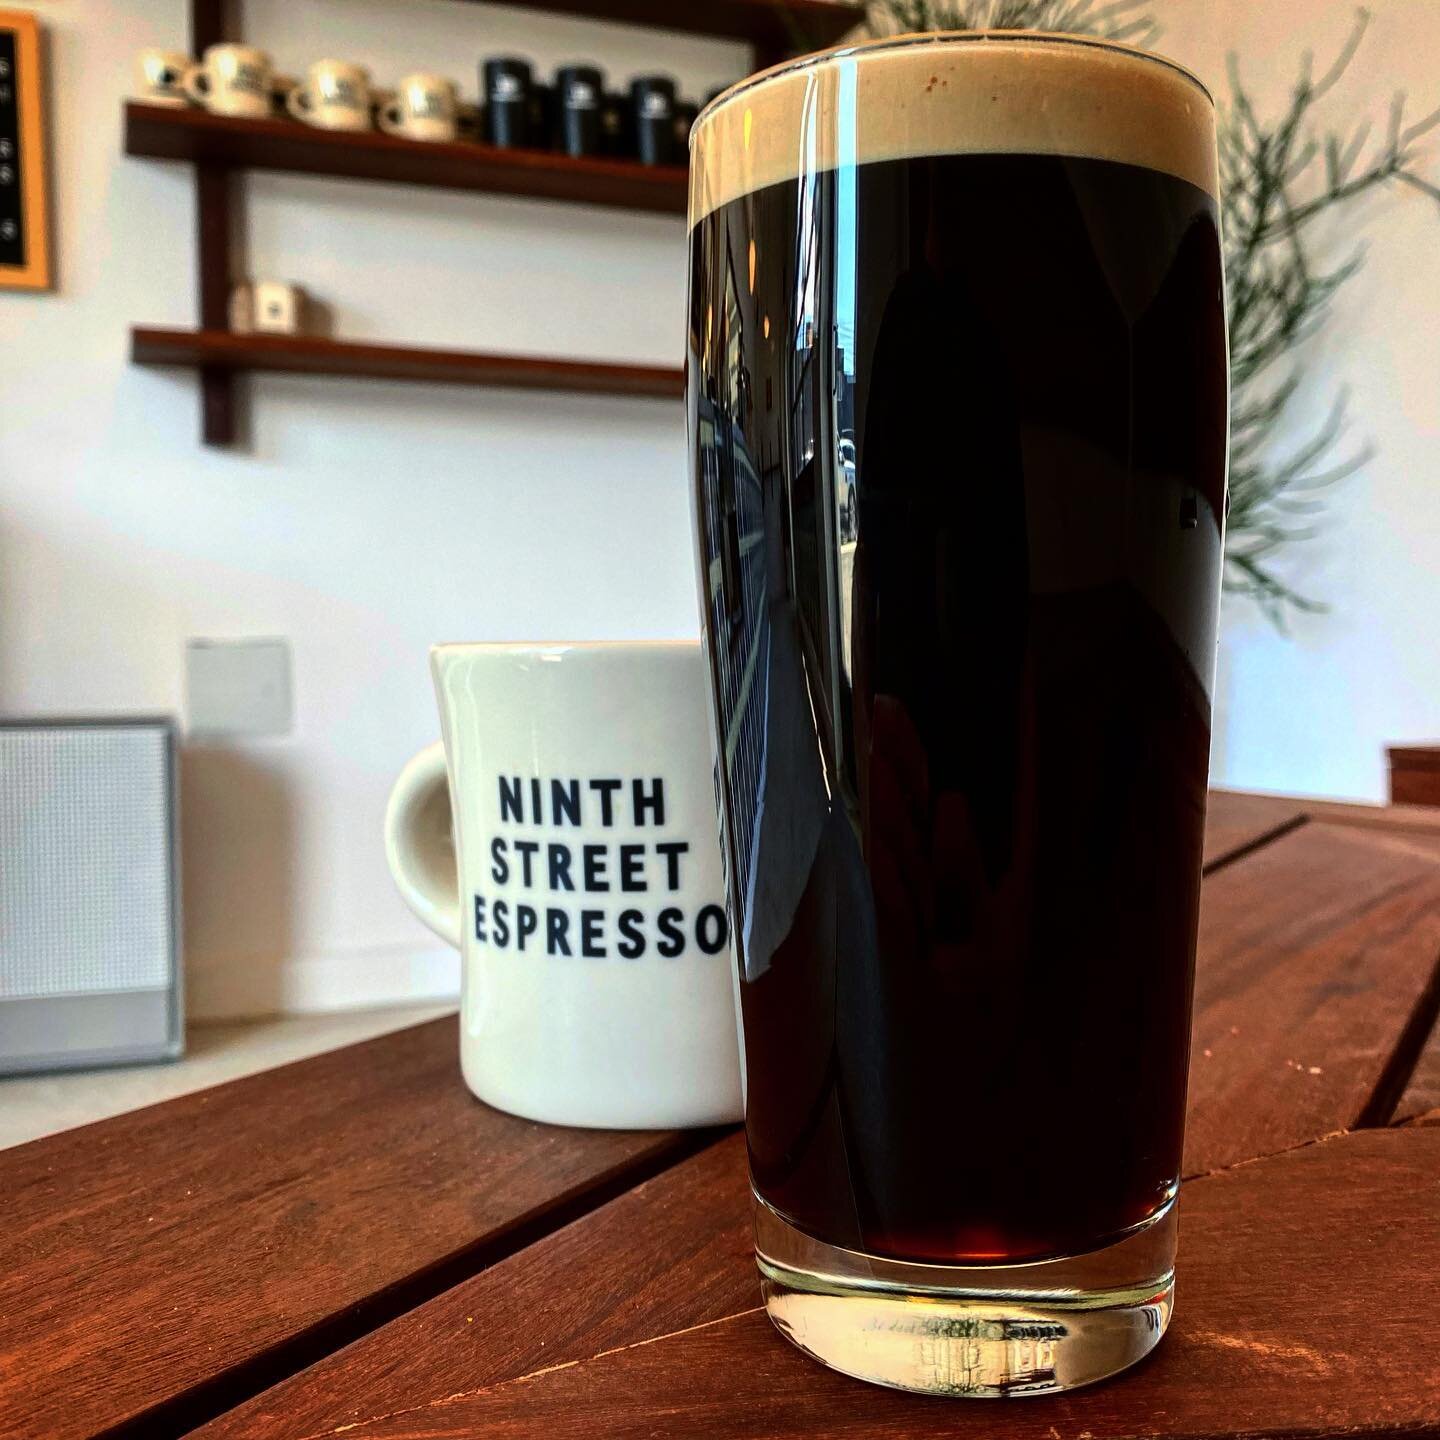 Twelfth Street is our new 5.7% Nitro Coffee Porter, a collaboration with our friends and neighbors @ninthstreetespresso 

The beans were roasted fresh next door - have you peeked into their windows and seen them roasting on weekdays?

We sampled a nu